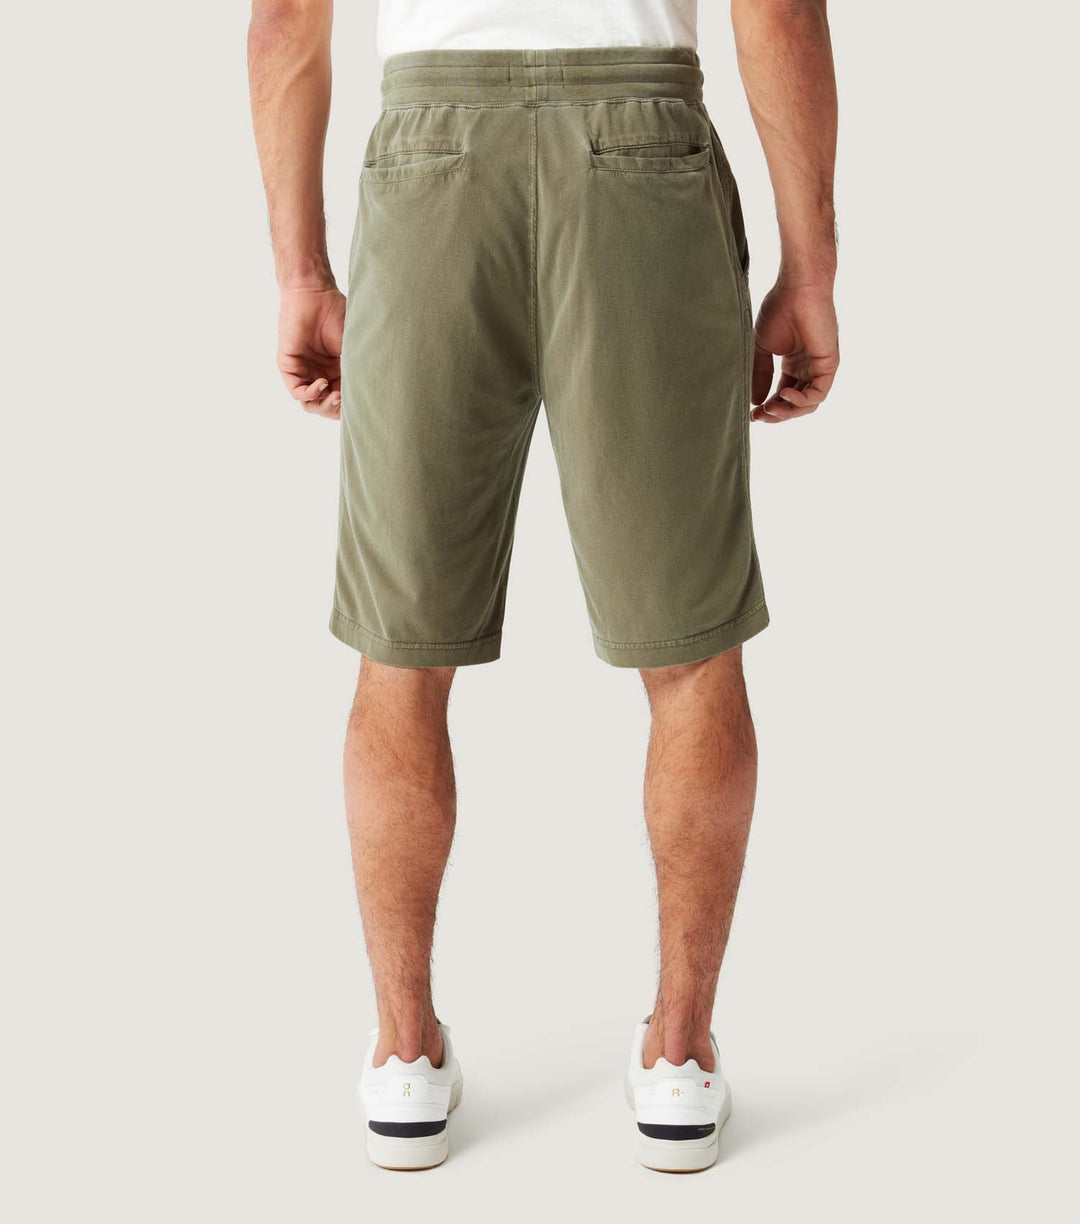 Washed Sueded Cotton Short Deep Olive Venice Wash - BLAW